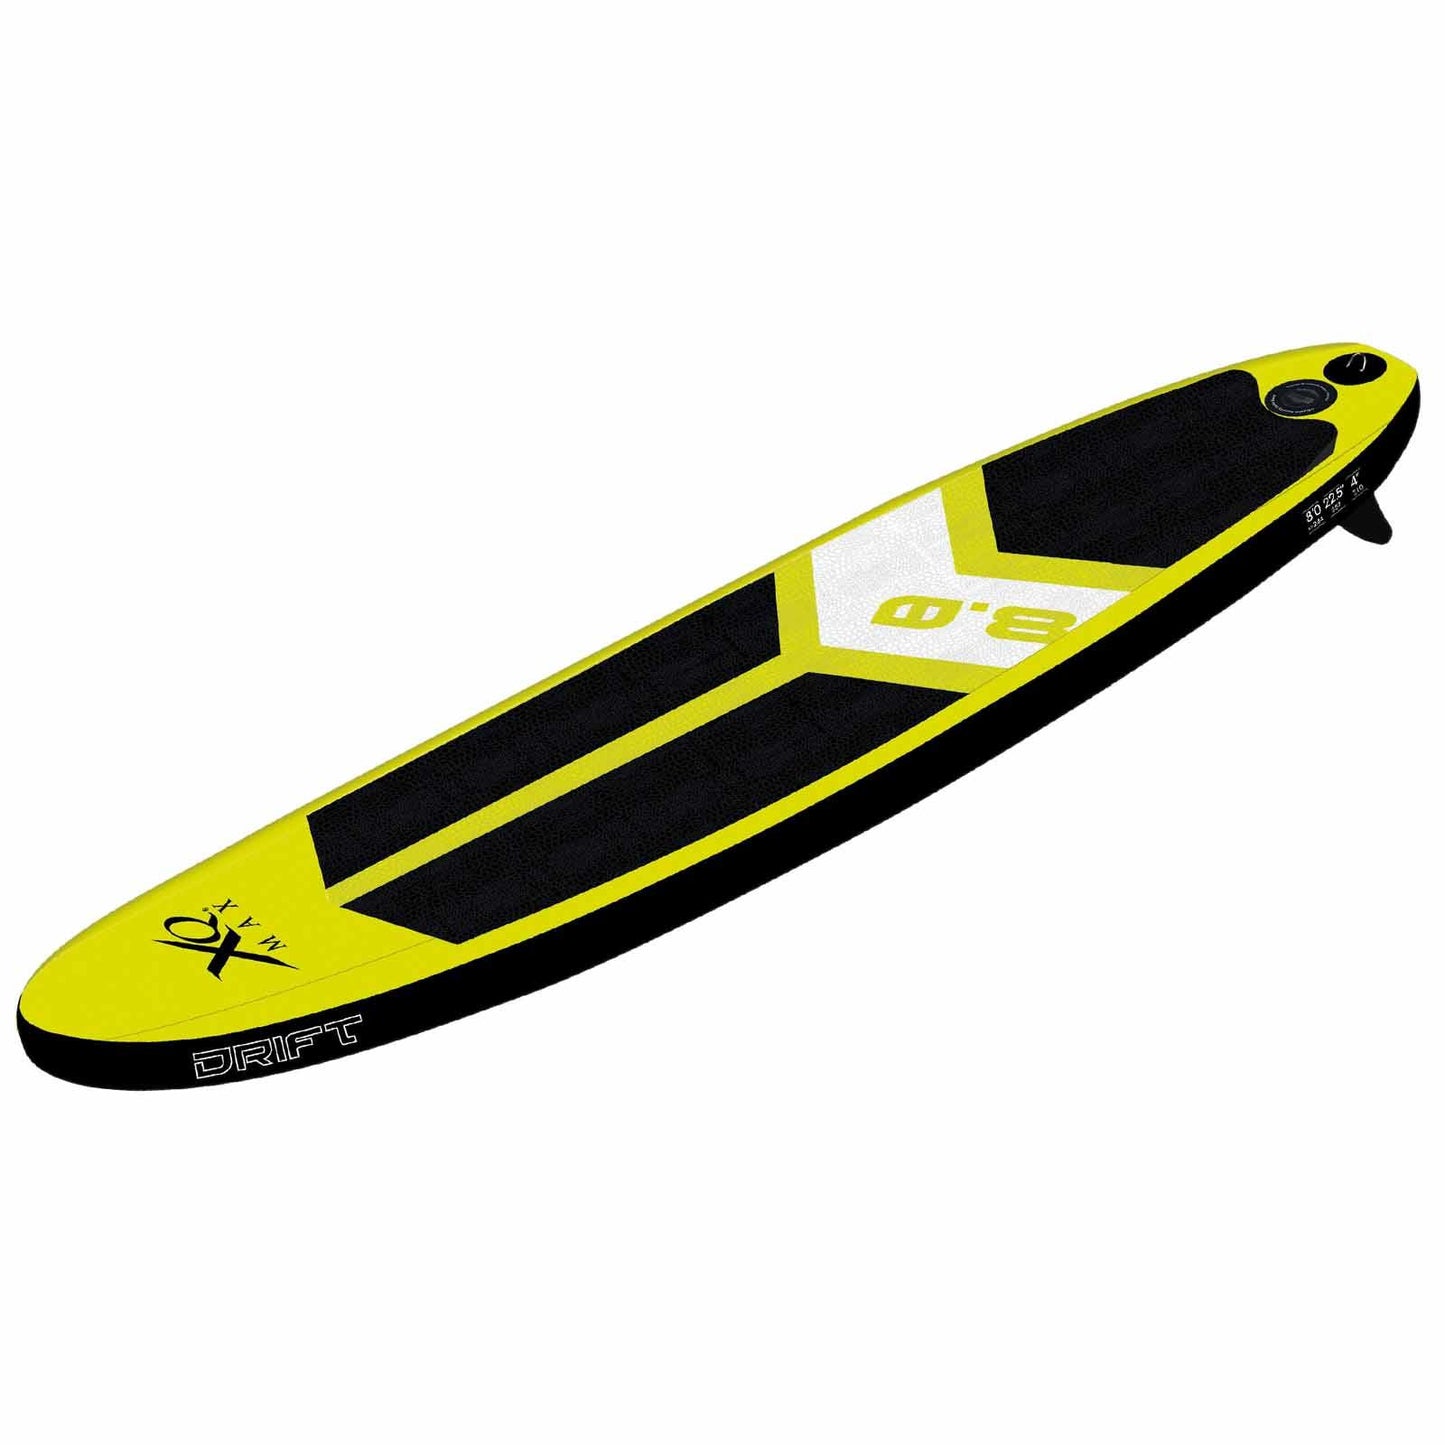 XQ Max 8ft 245cm Inflatable Surfboard SUP Paddleboard